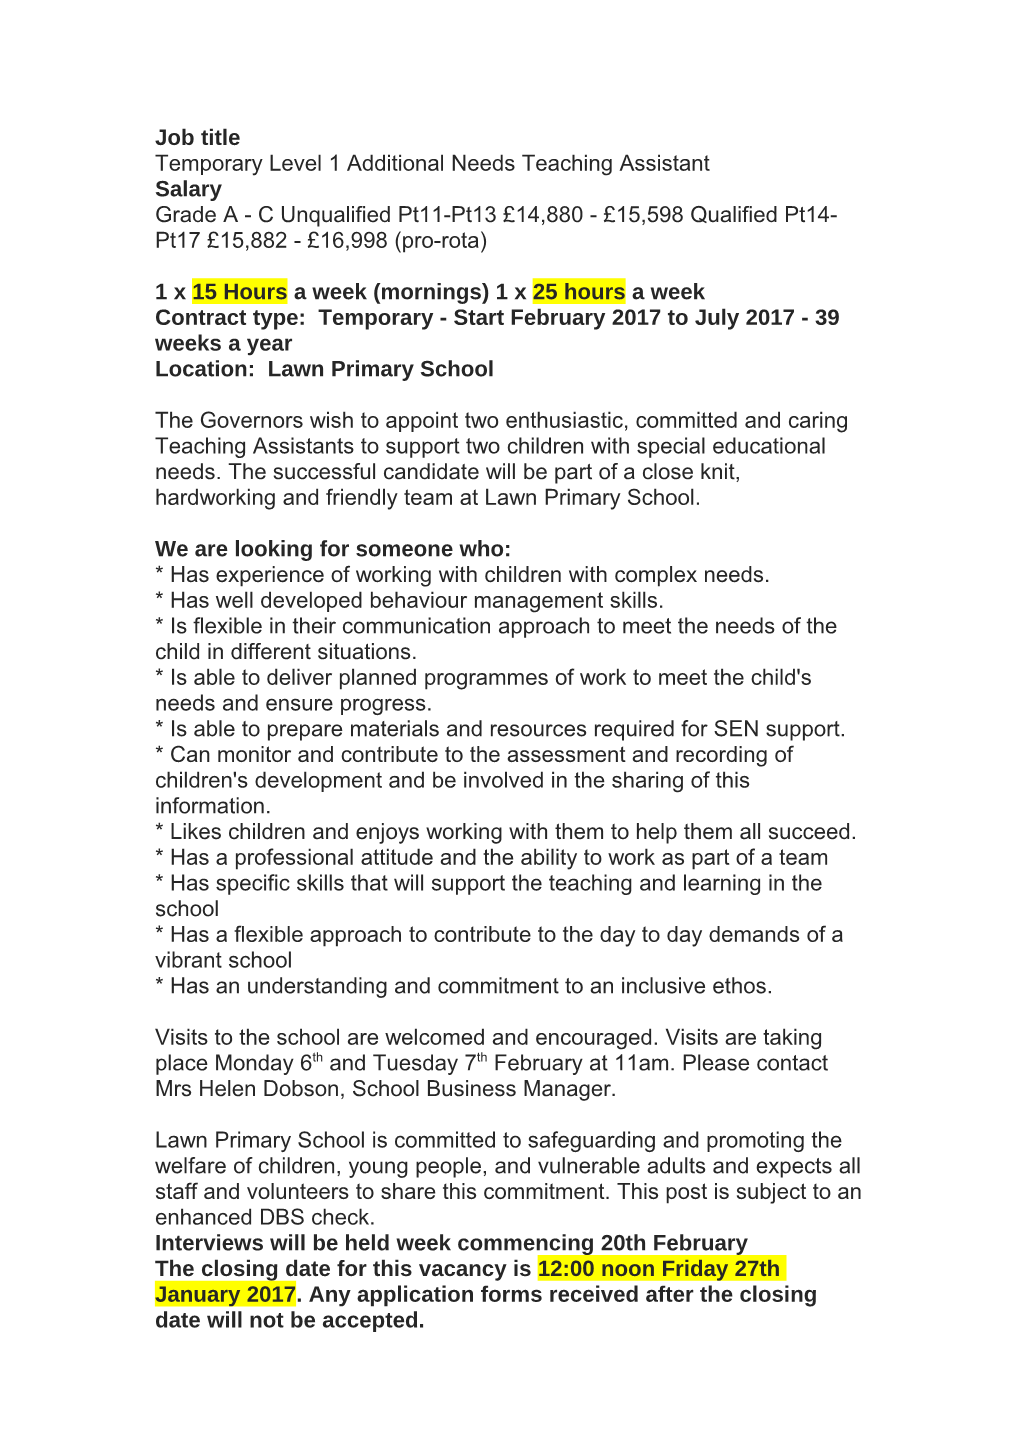 Temporary Level 1 Additional Needs Teaching Assistant